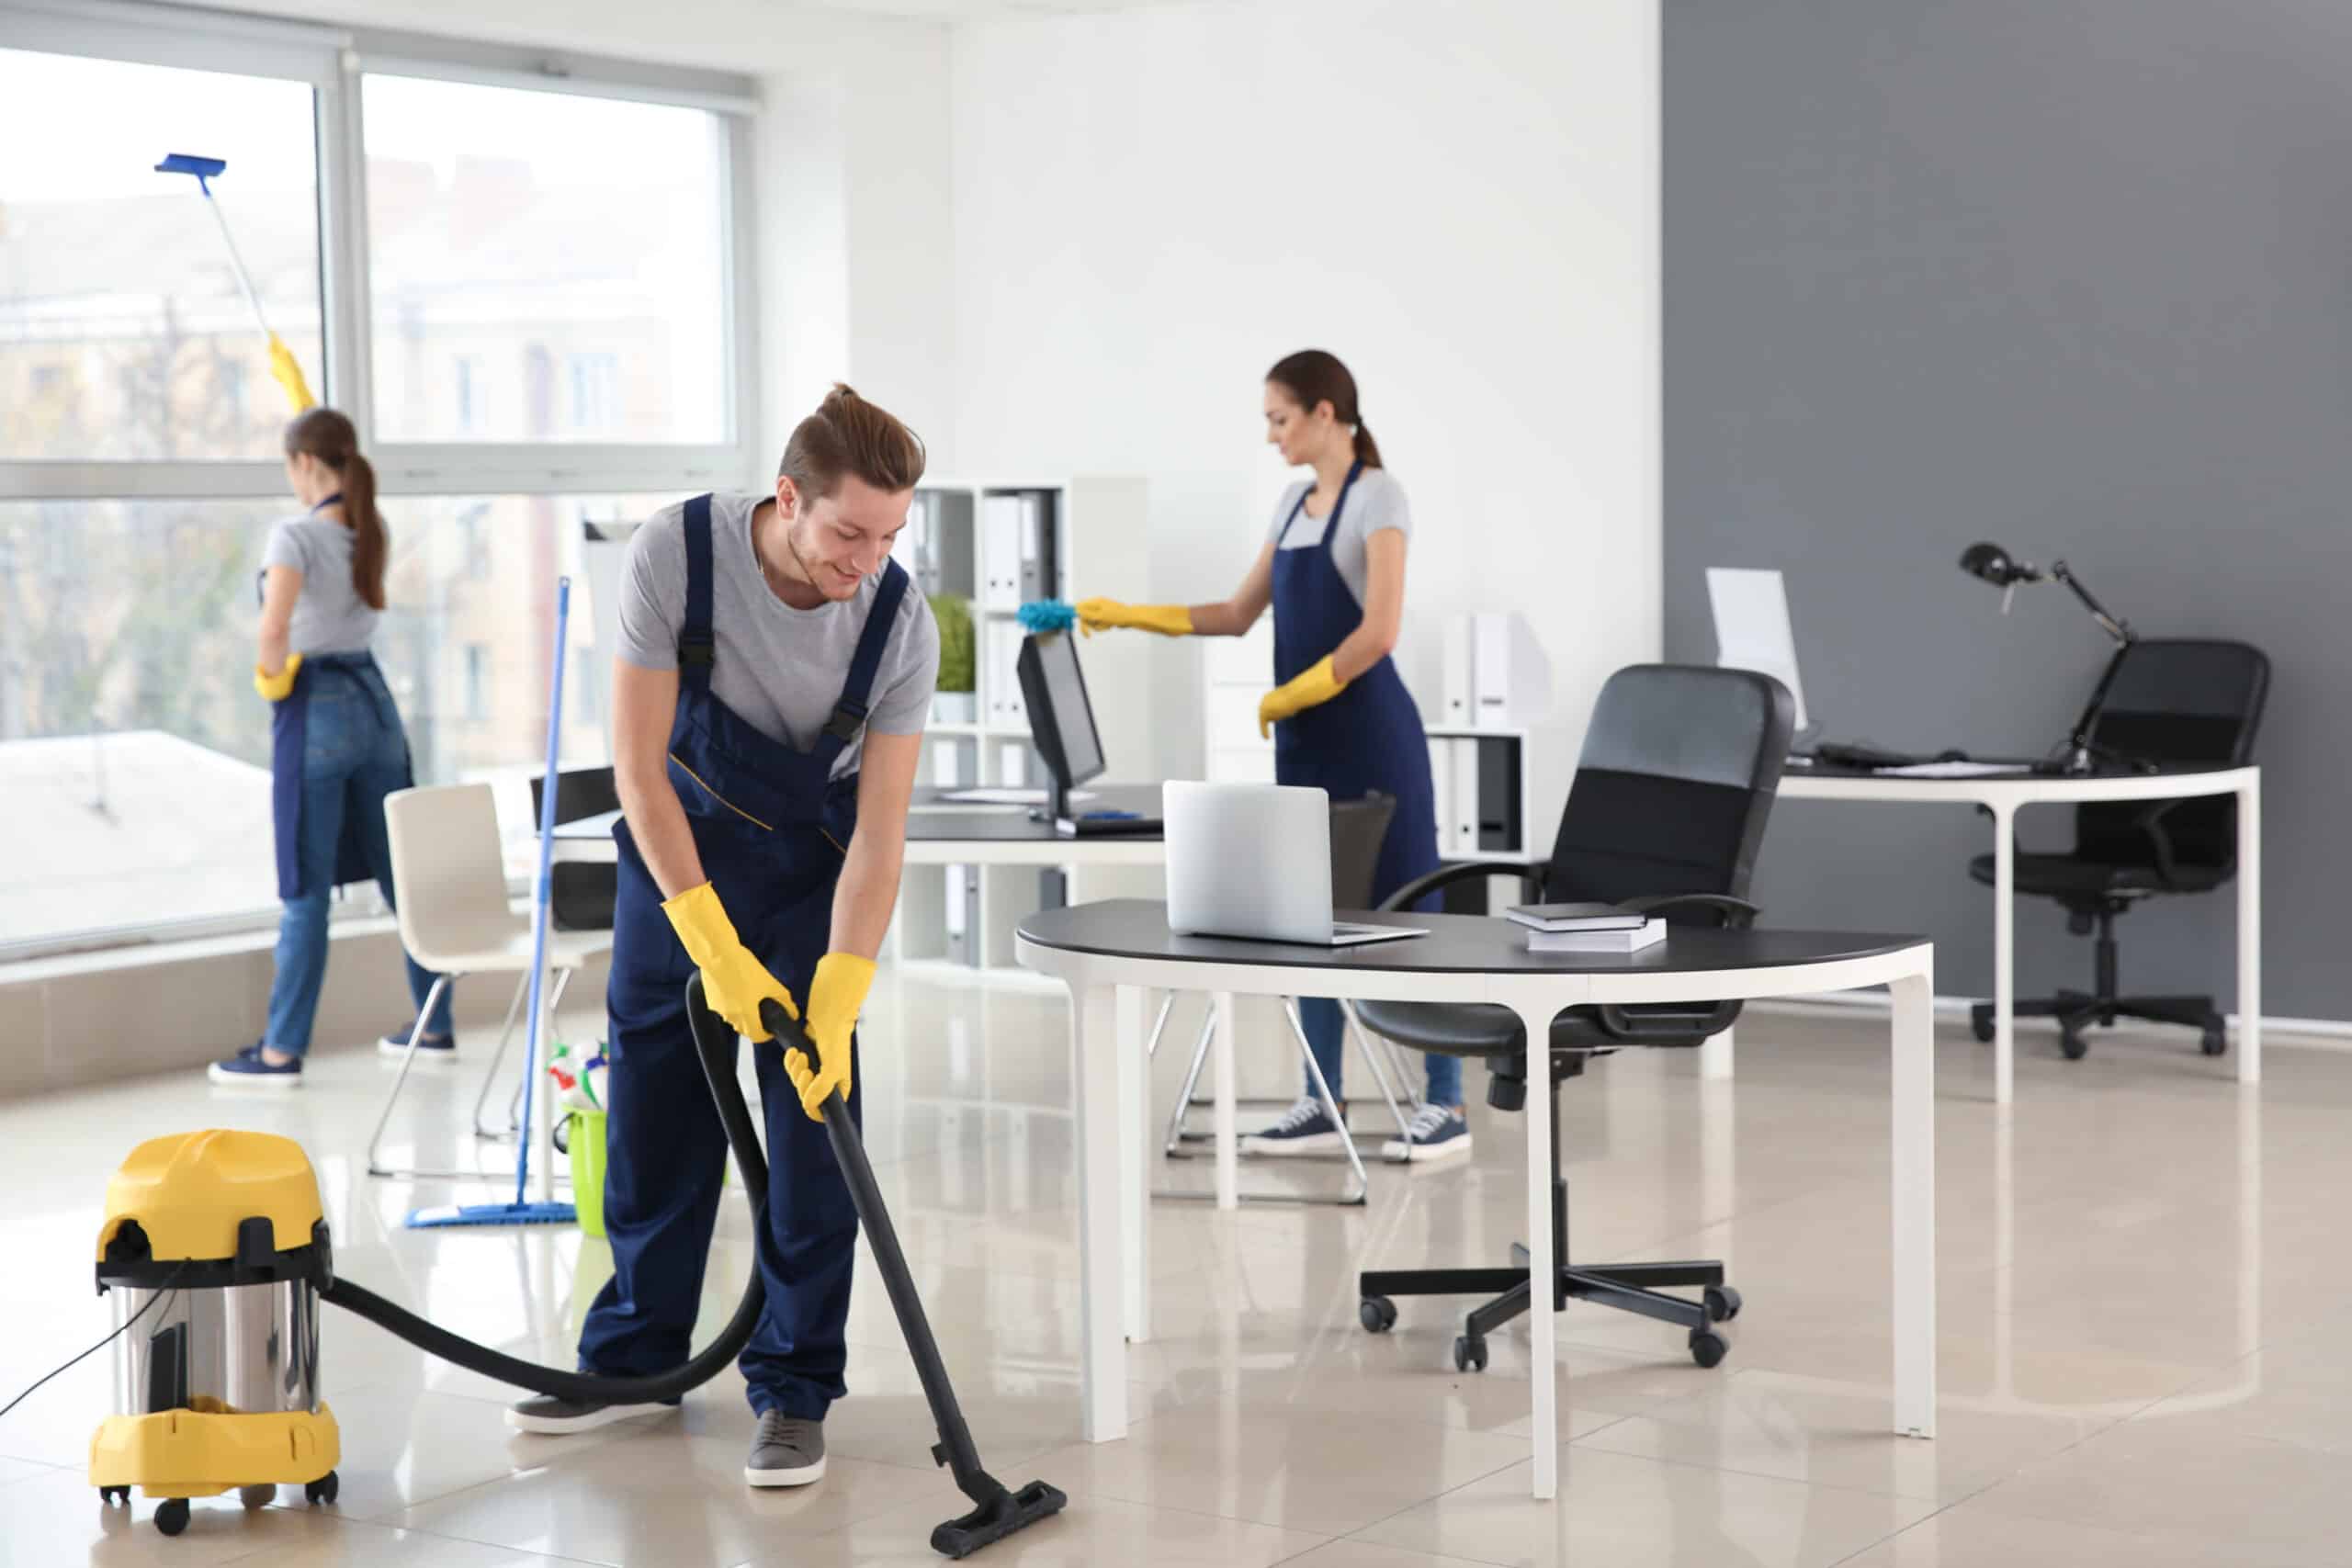 How to Choose a Cleaning Company That Aligns with Your Business Values